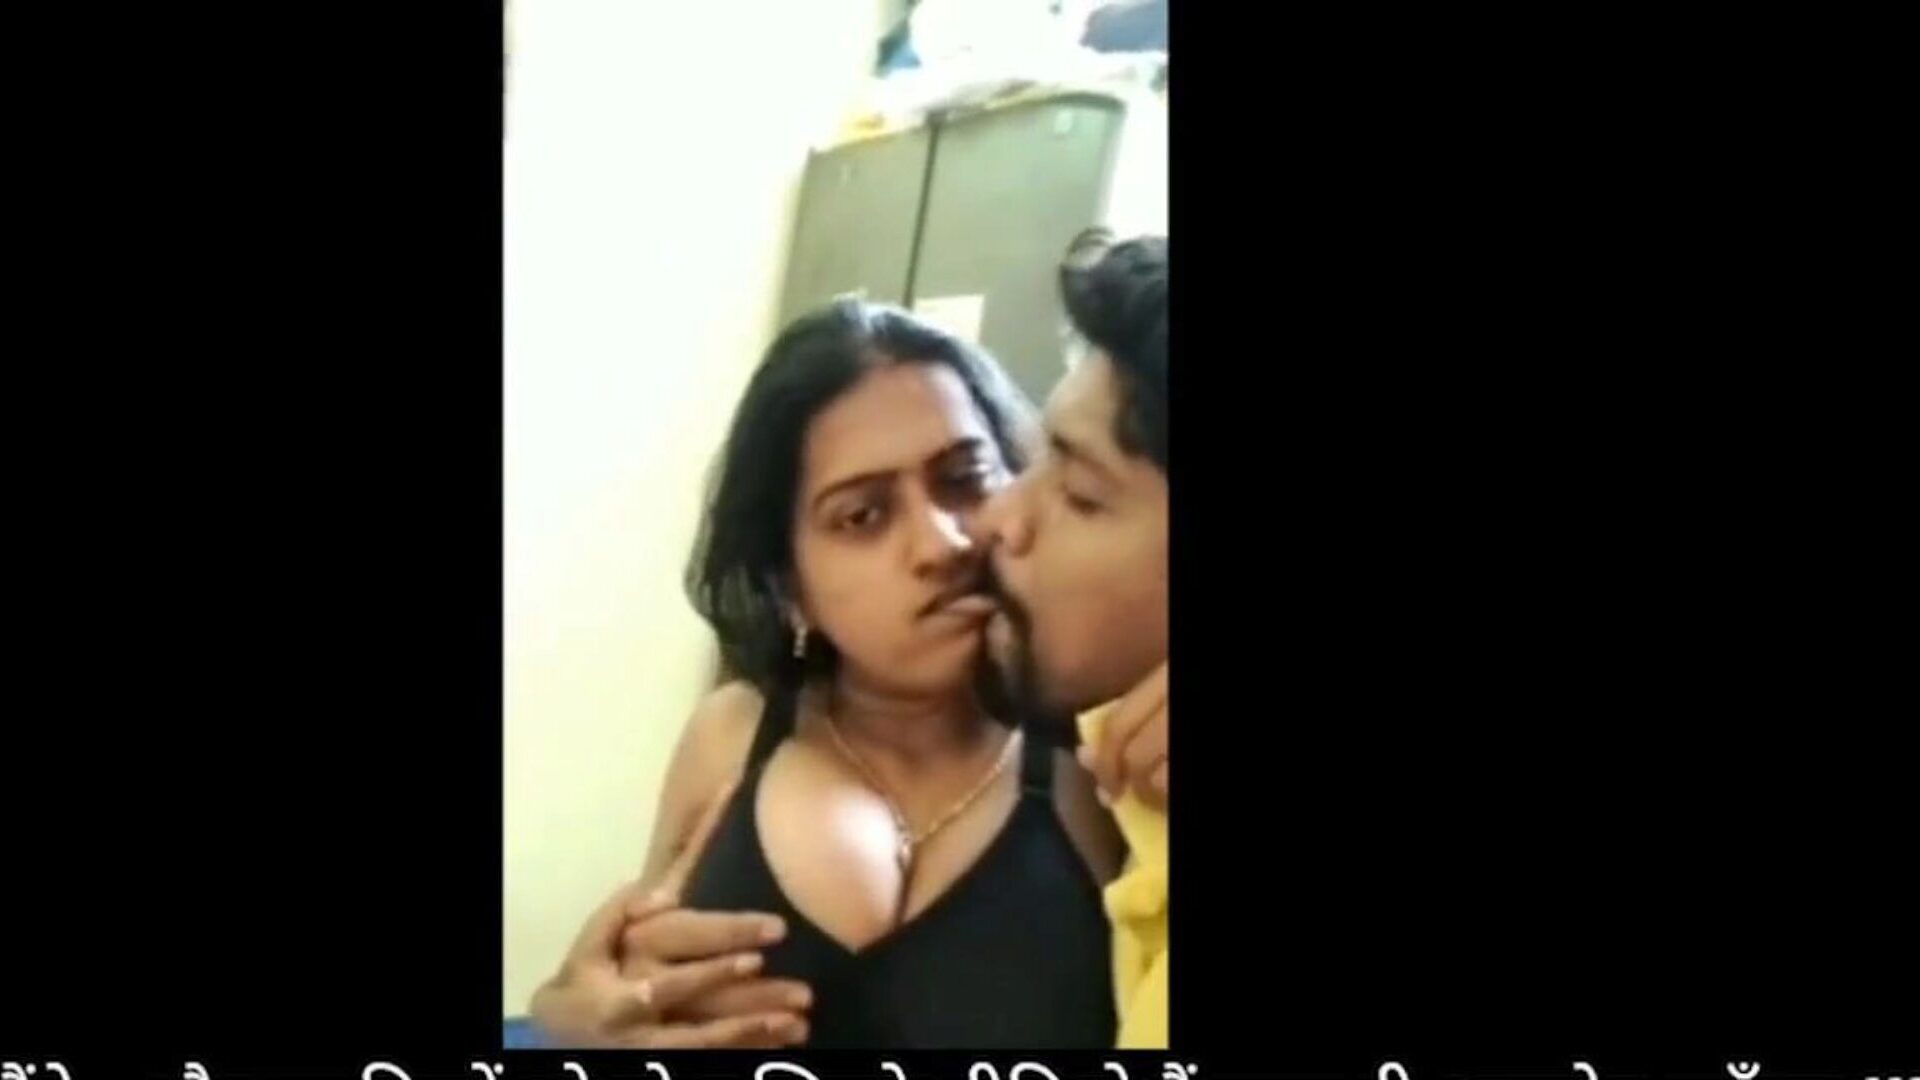 Bhabhi Devar Home Sex Fun During Lockdown: Free HD Porn fa Watch Bhabhi Devar Home Sex Fun During Lockdown movie on xHamster - the ultimate archive of free Indian Free Home Sex HD hard-core porn tube vids